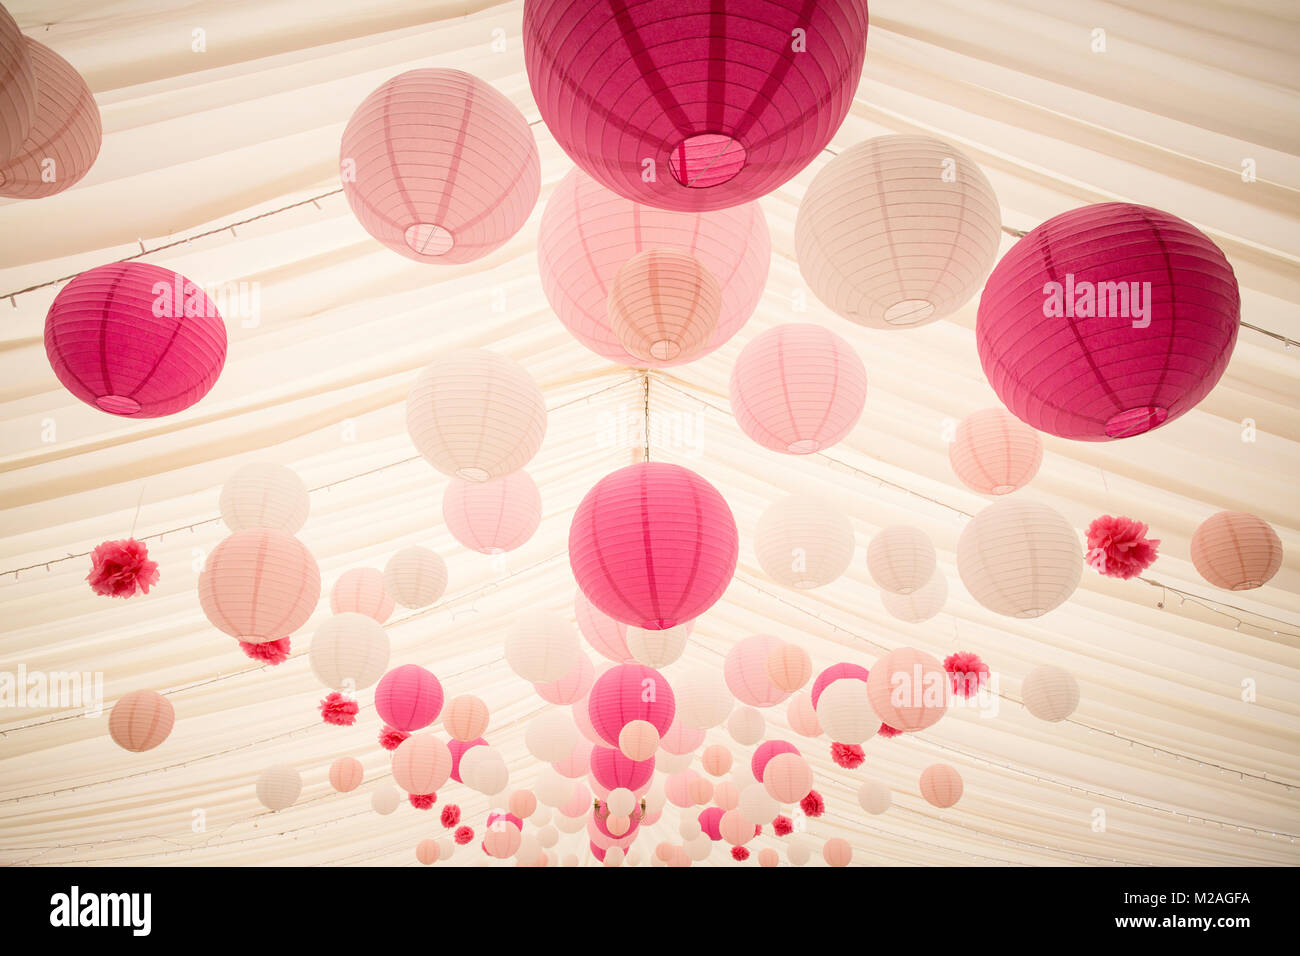 Pink paper lanterns hanging in marquee, low angle view Stock Photo